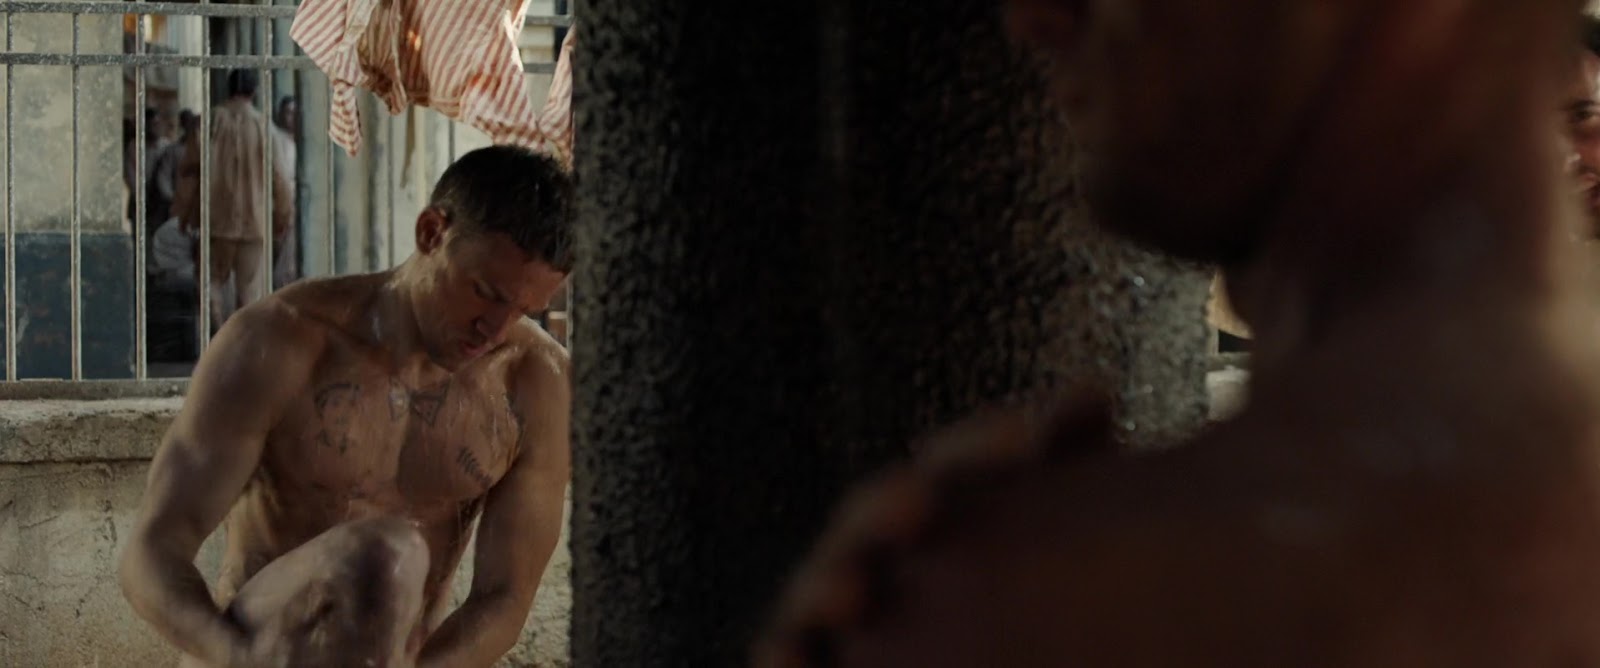 Charlie Hunnam and Rami Malek nude in Papillon.